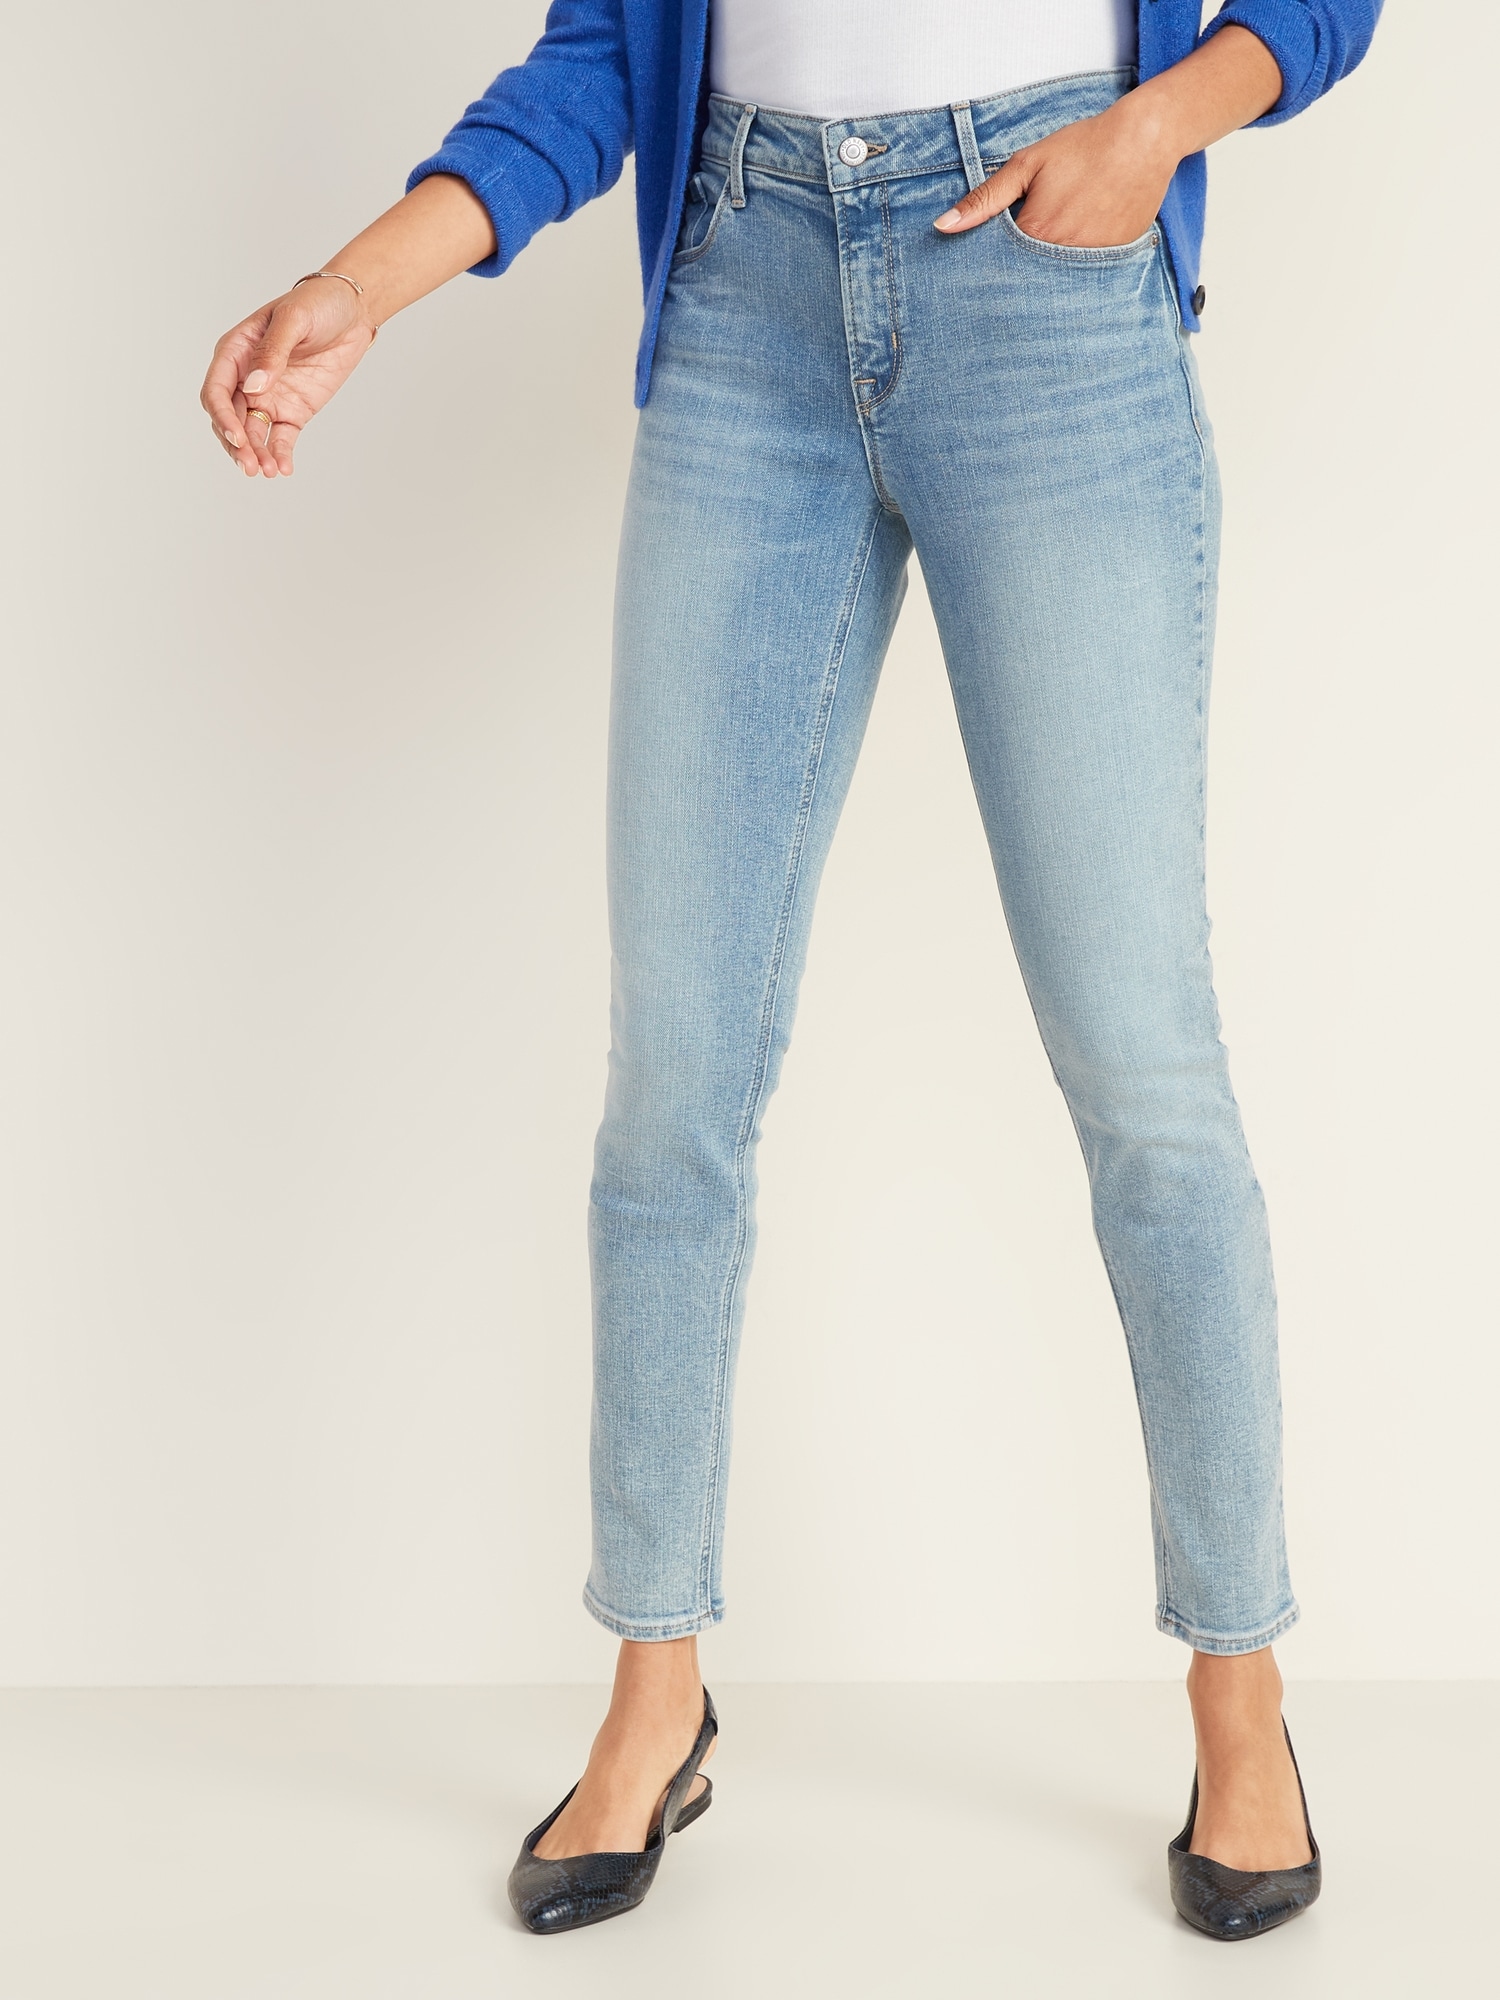 old navy curvy mid rise jeans